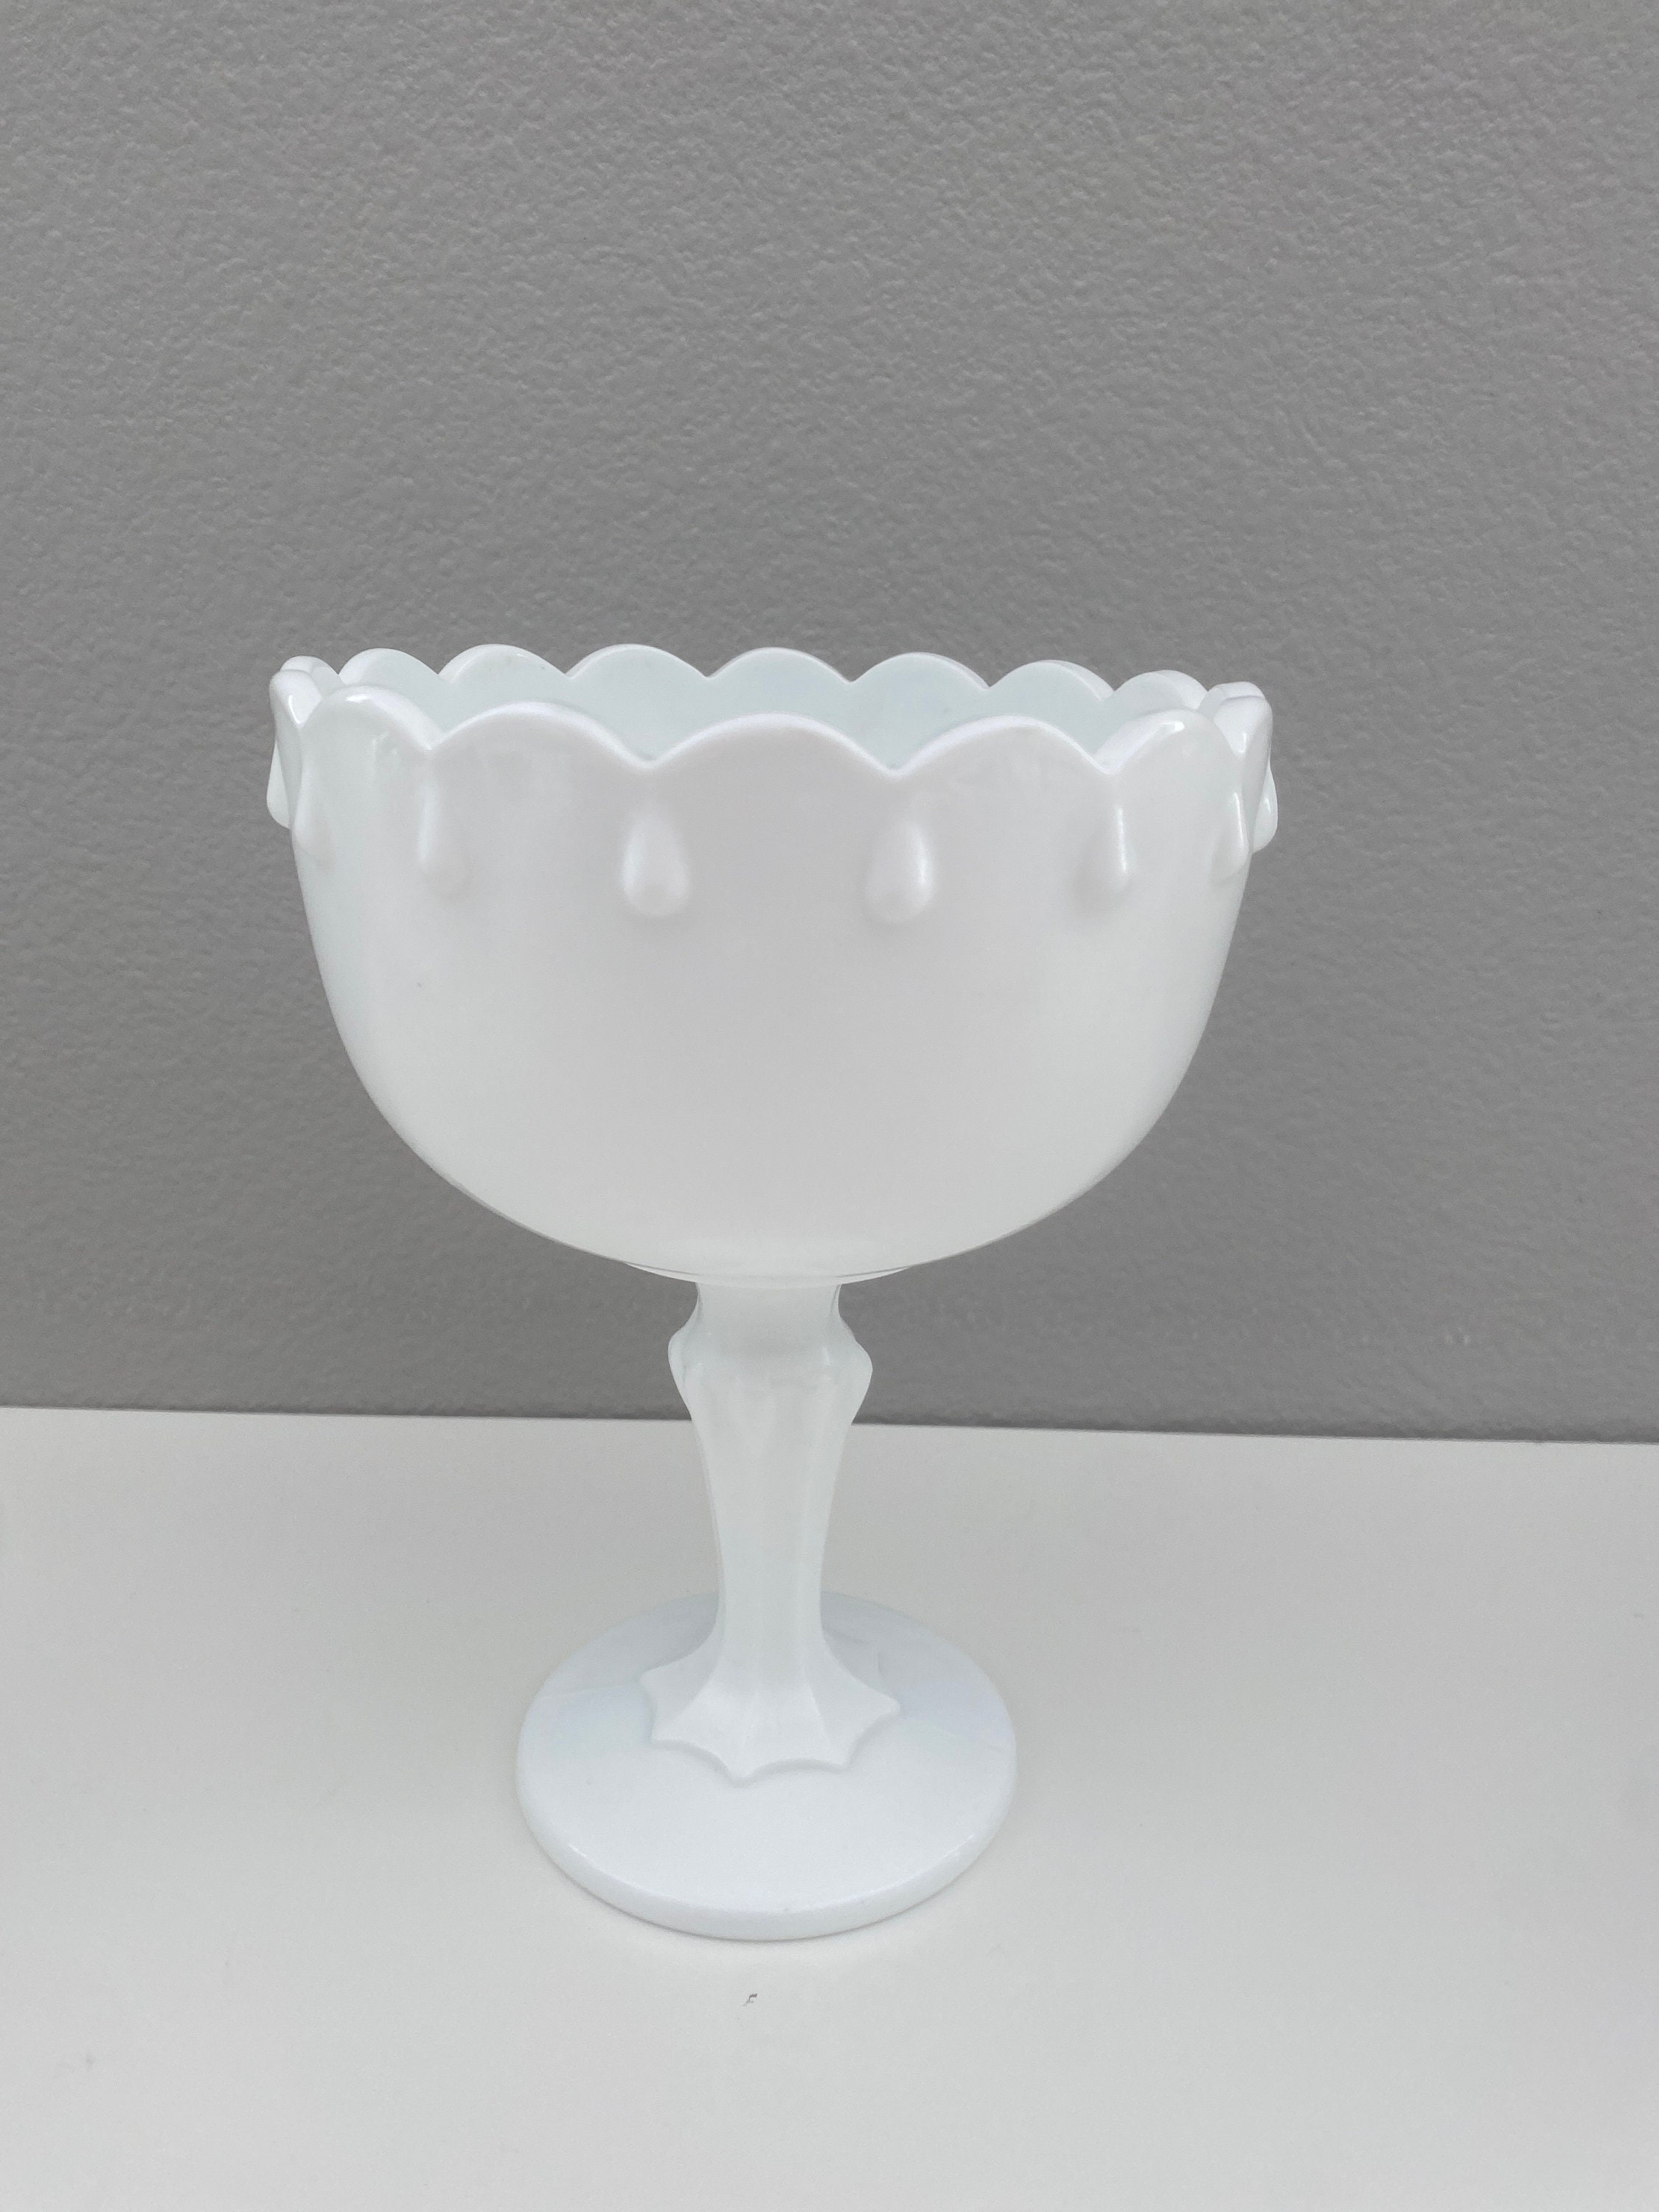 Vintage Milk Glass Collection / Cake Stand / Vases / Compotes / Wedding /  Bridal Shower / Centerpiece/ / Party Decor / Home Decor 